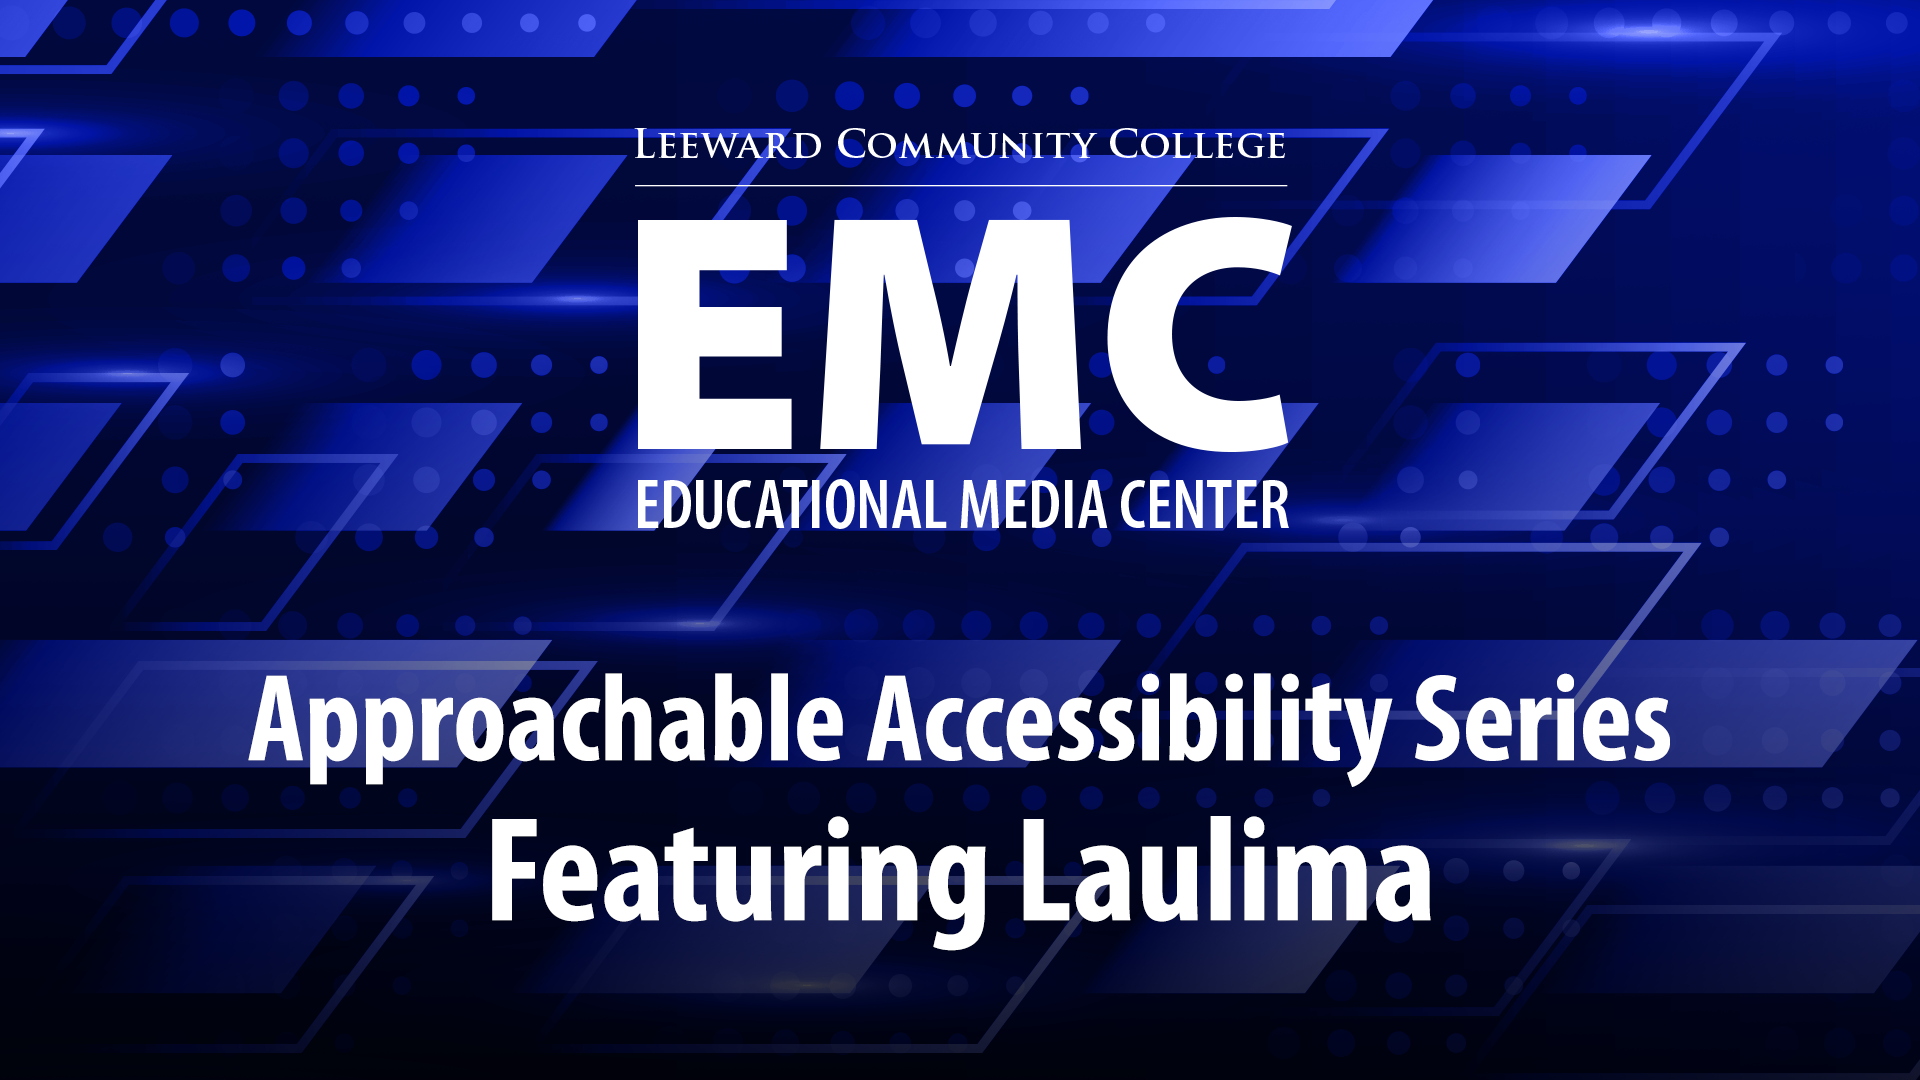 Approachable Accessibility Series Featuring Laulima